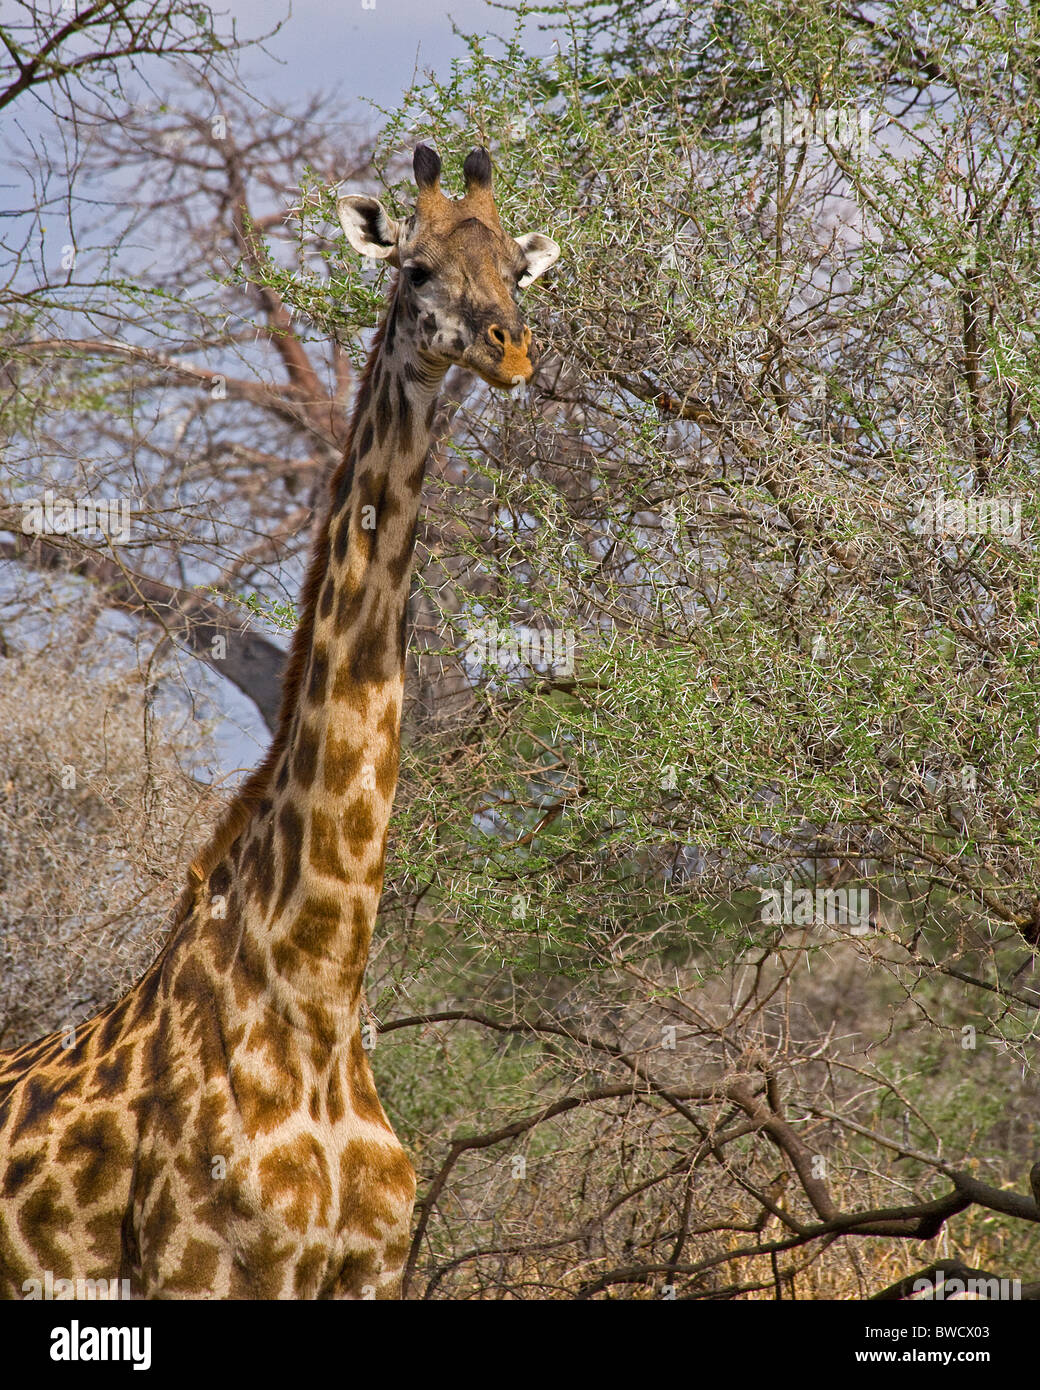 A giraffe pauses from foraging to inspect the visitors on a Tanzanian safari. Stock Photo